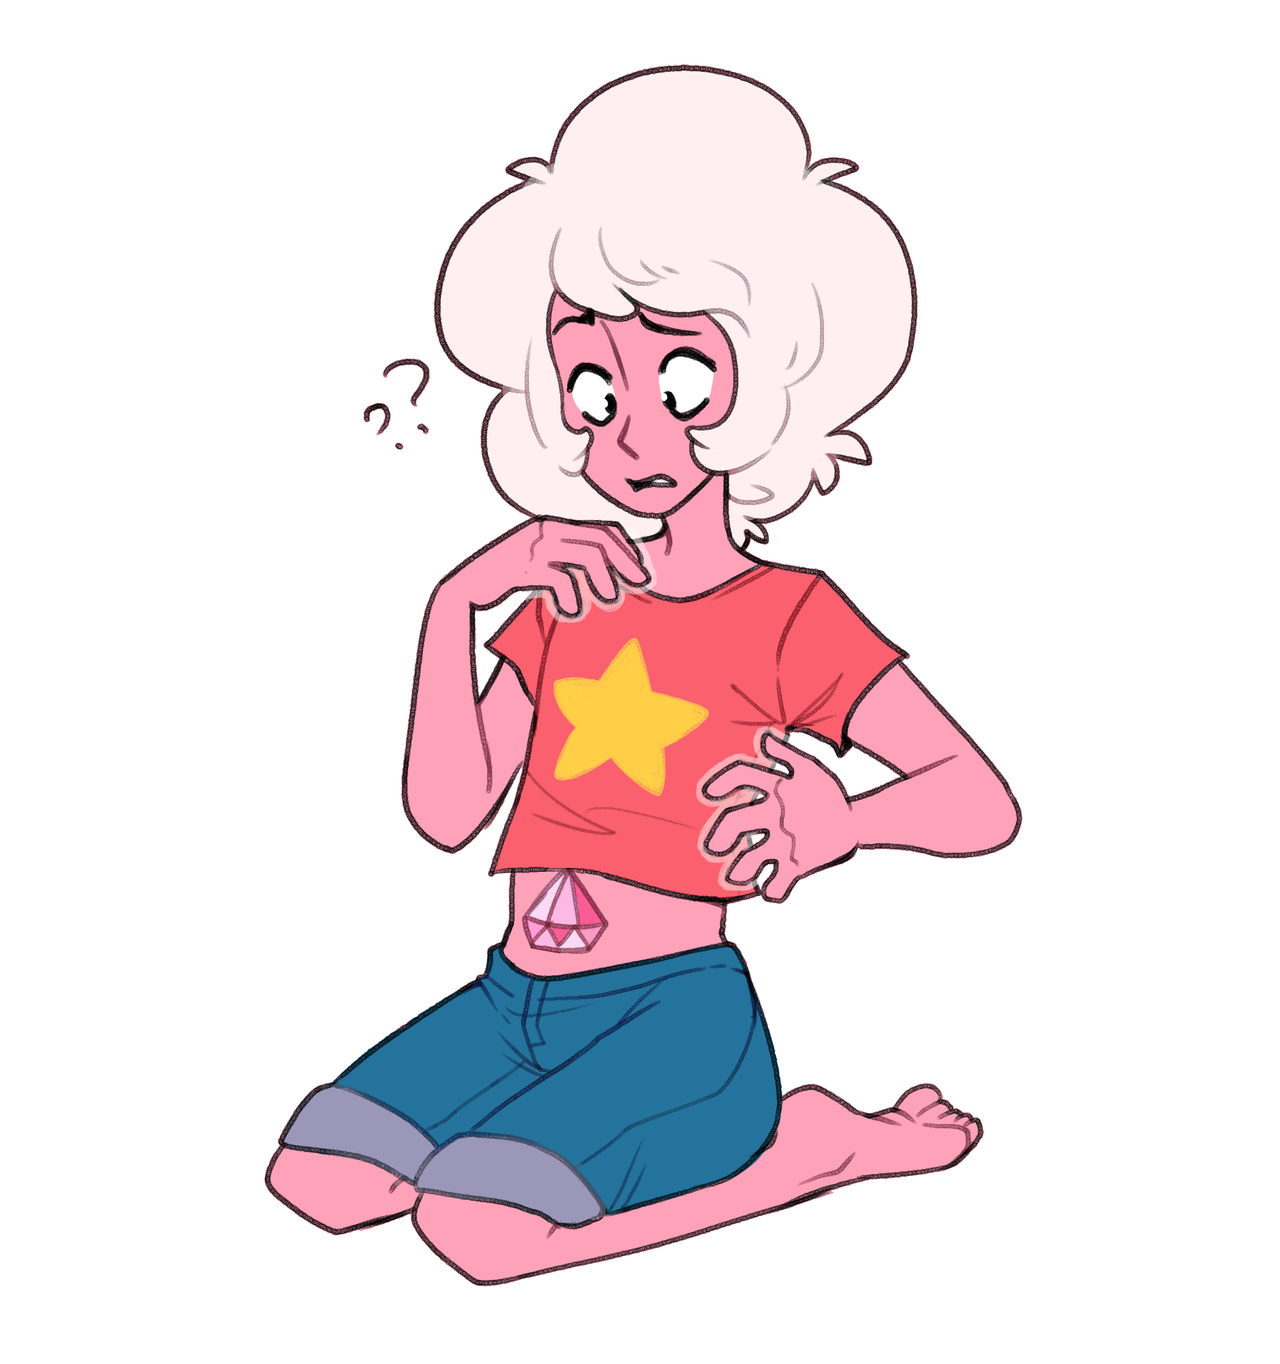 before change your mind aired I thought of an AU where Steven reformed into something like PD. He looks mostly the same as her other than his eyes.